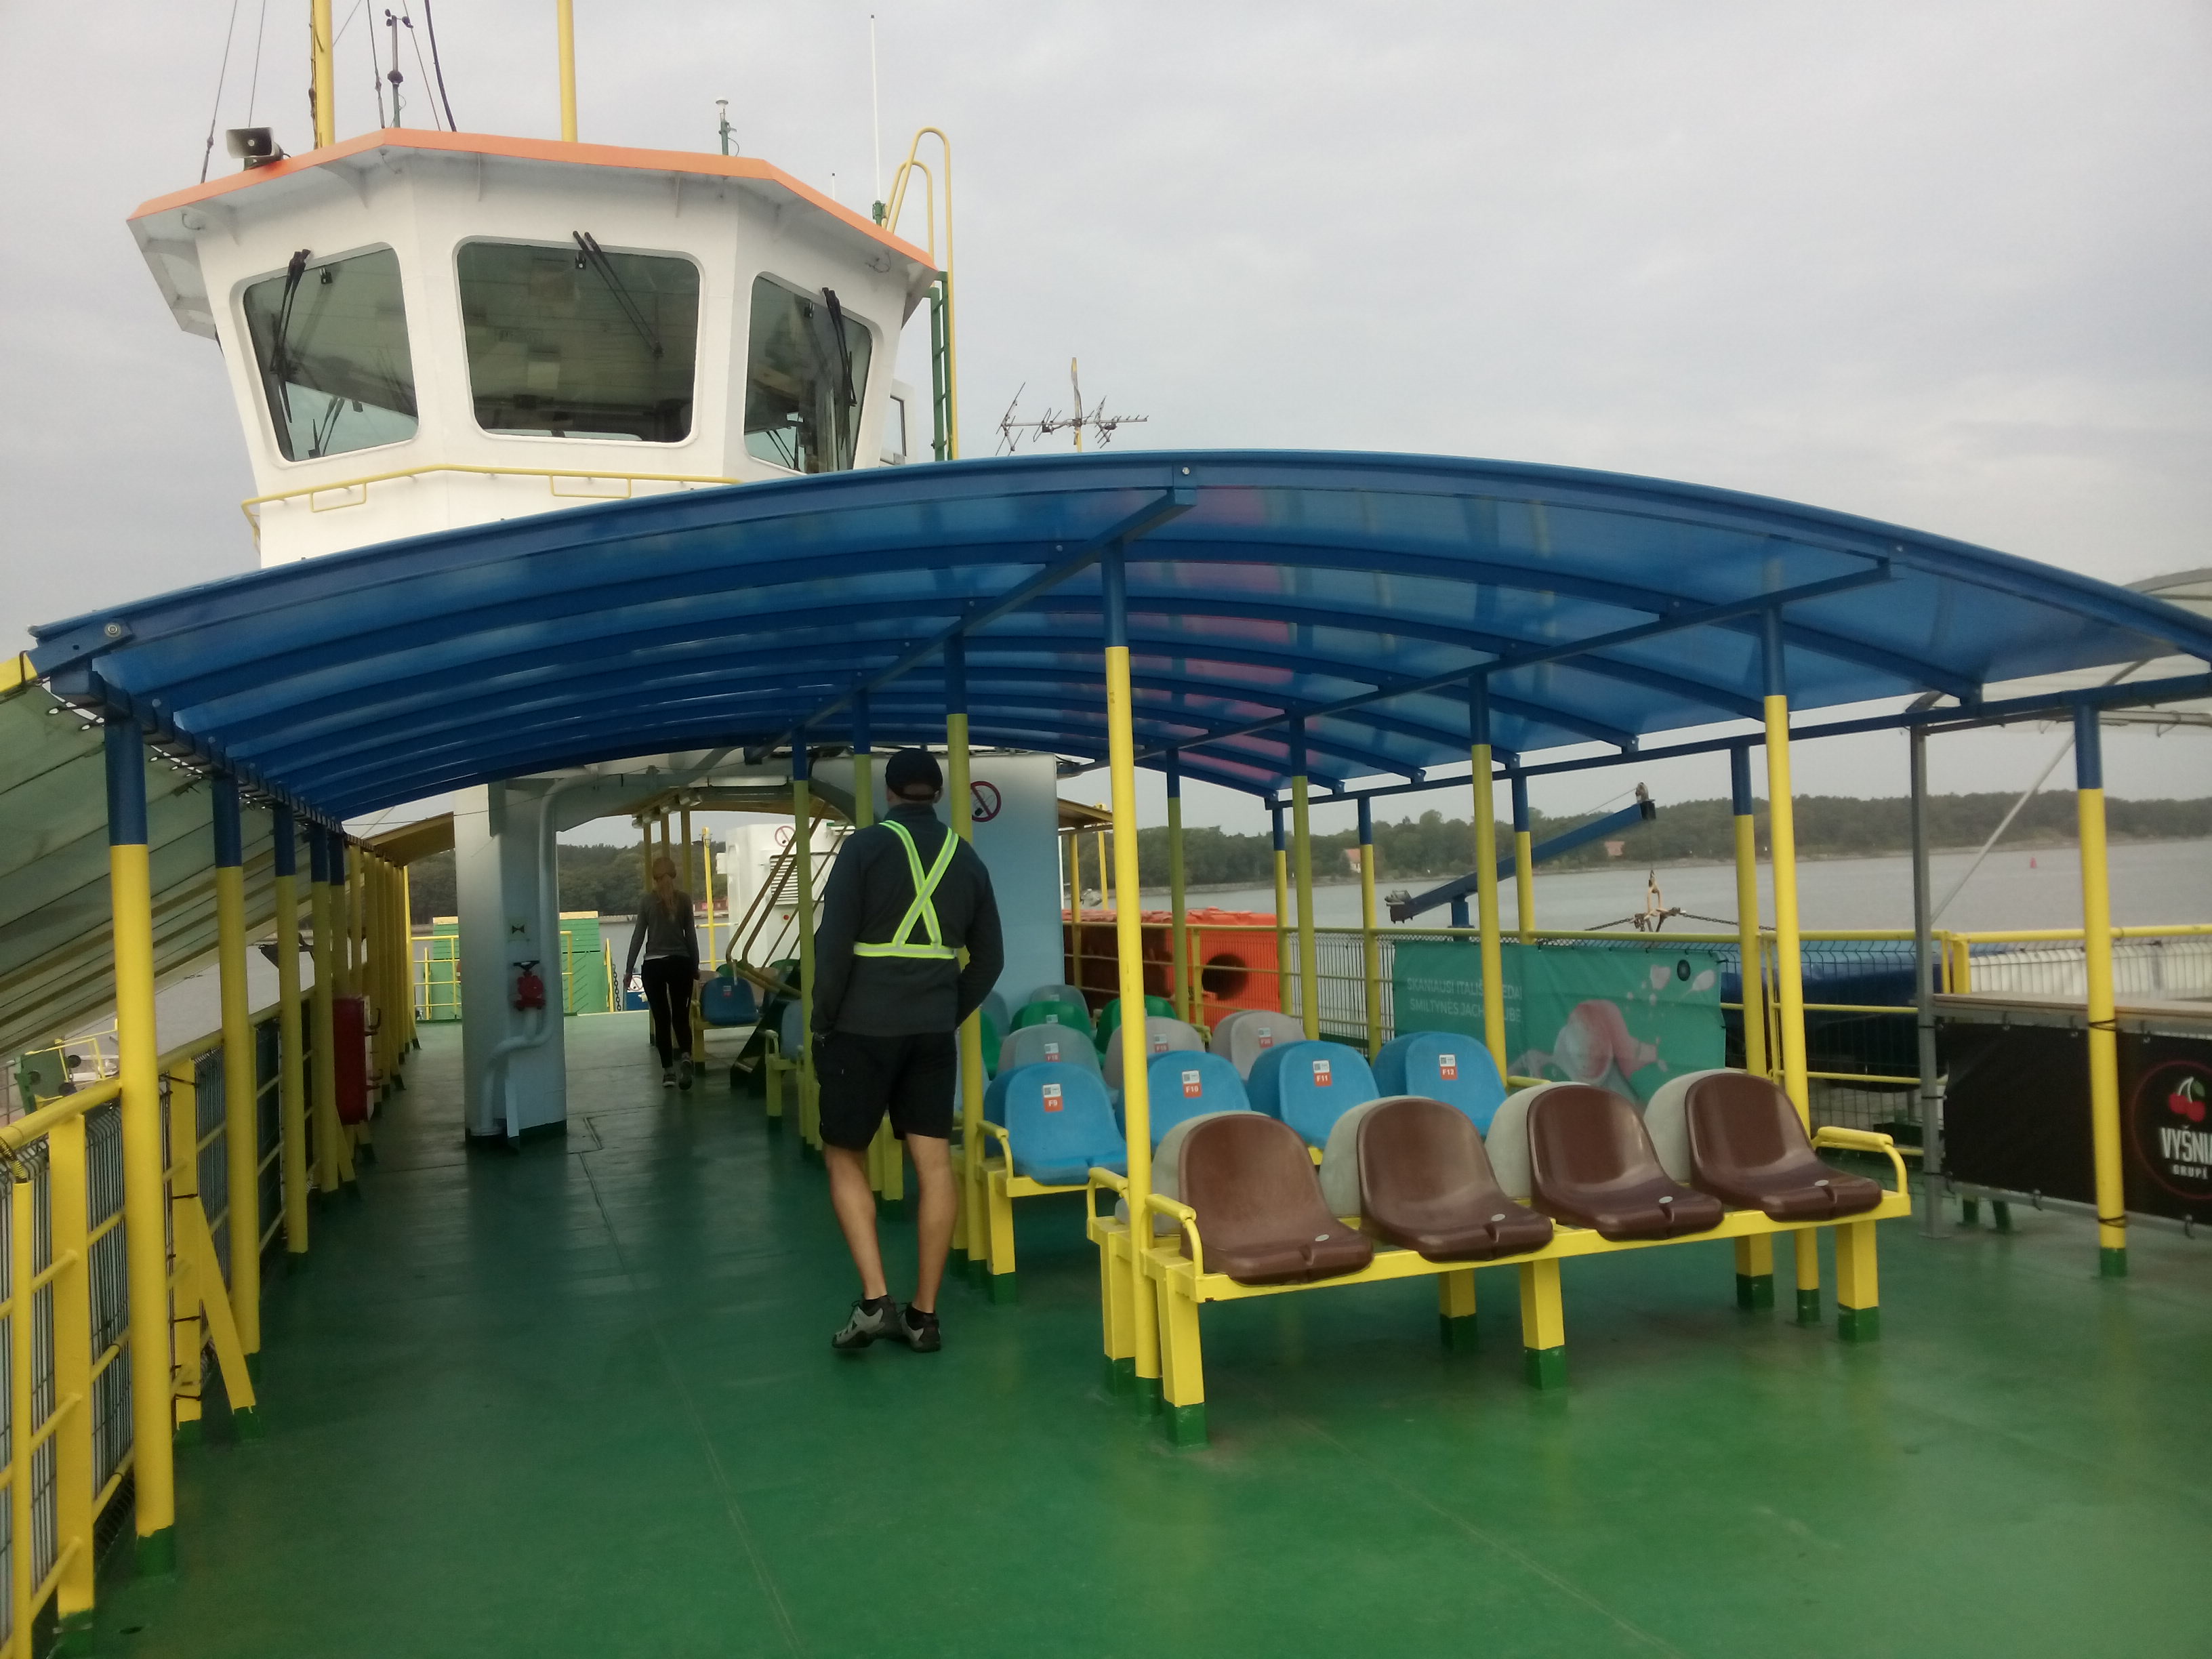 A ferry deck with a green floor, plastic blue roof and plastic chairs, with open sides; the cabin is visible at the top and the sky is overcast